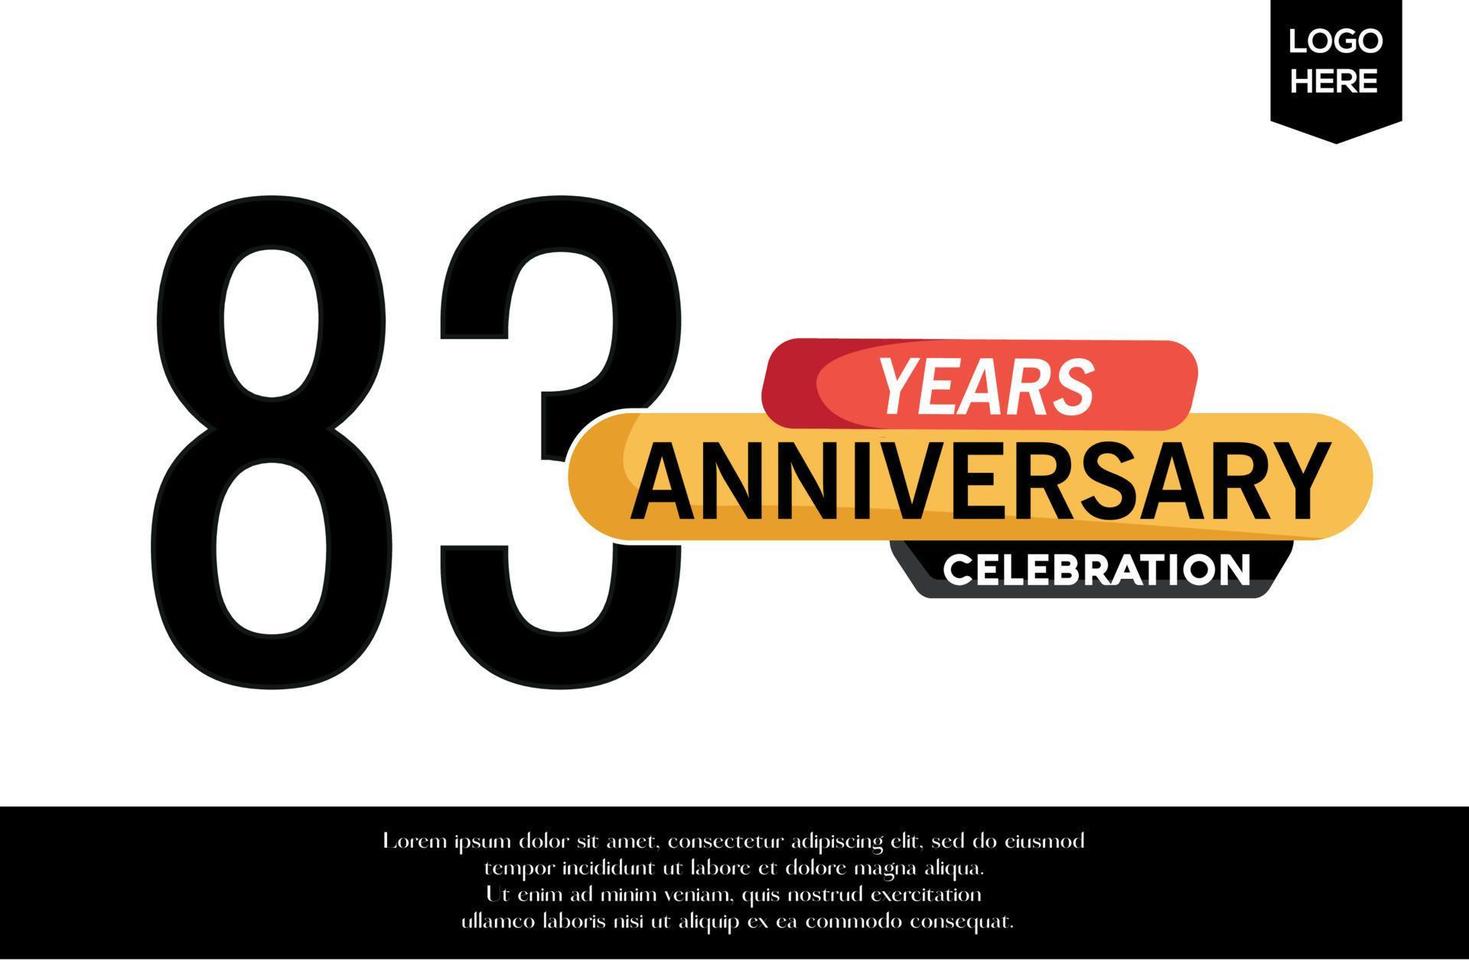 83rd anniversary celebration logotype black yellow colored with text in gray color isolated on white background vector template design